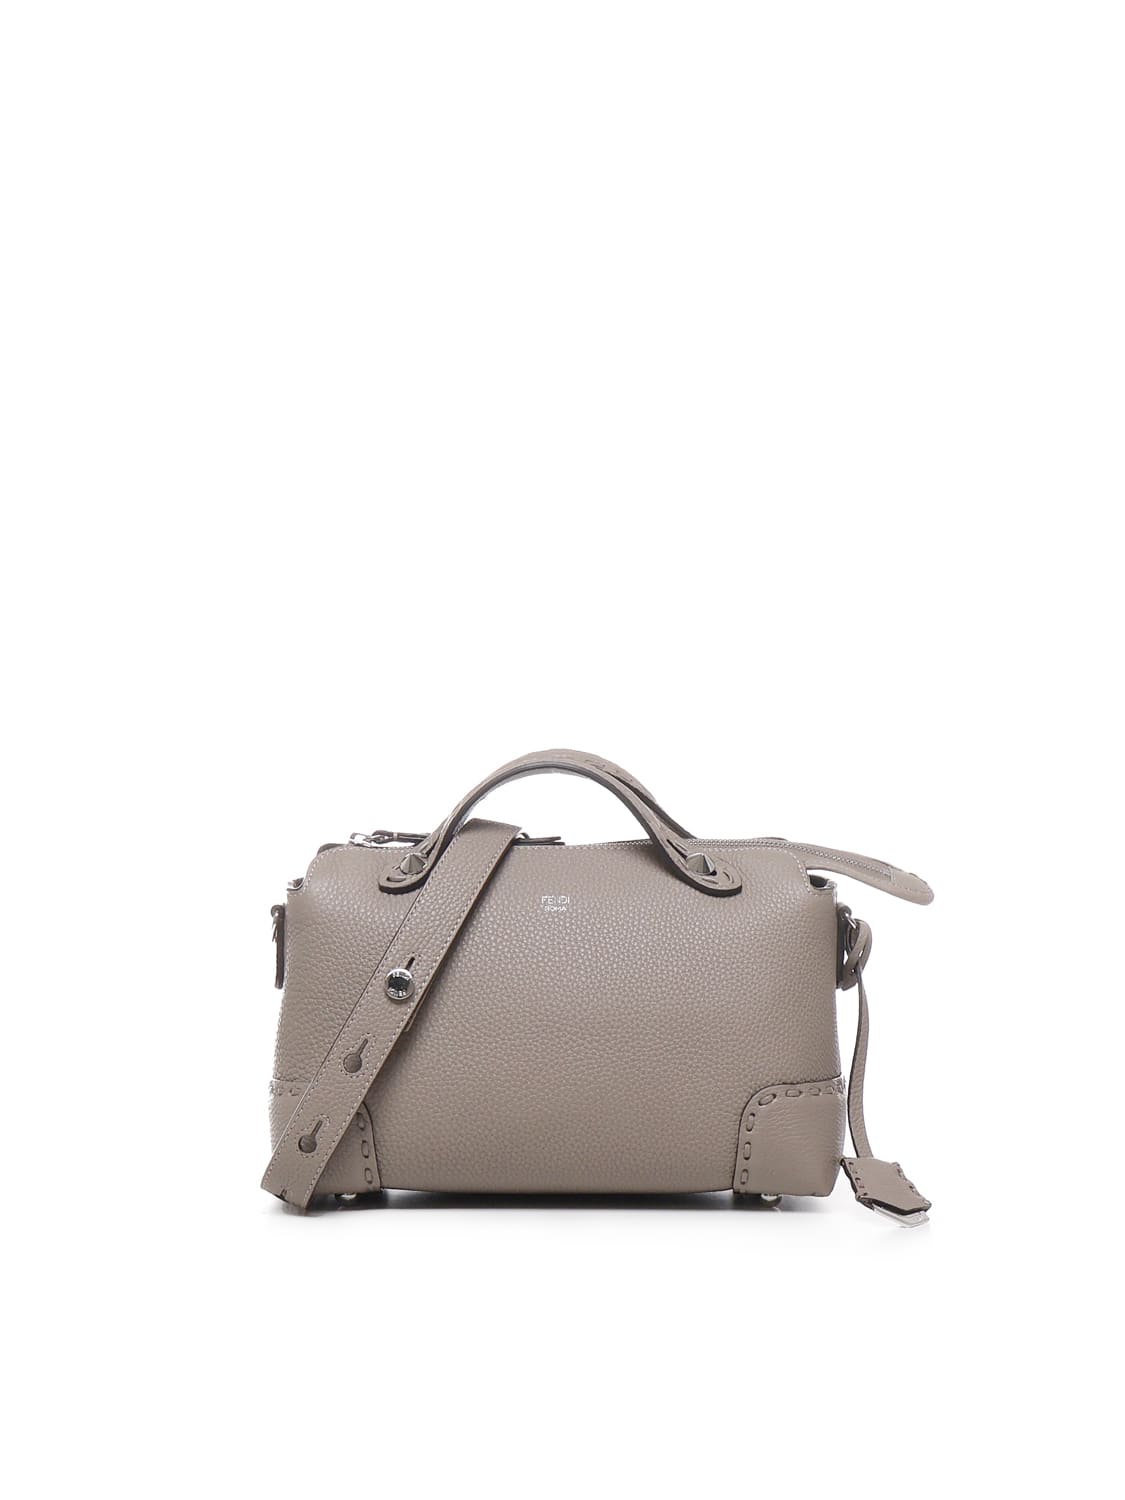 Fendi Boston By The Way Medium In Taupe